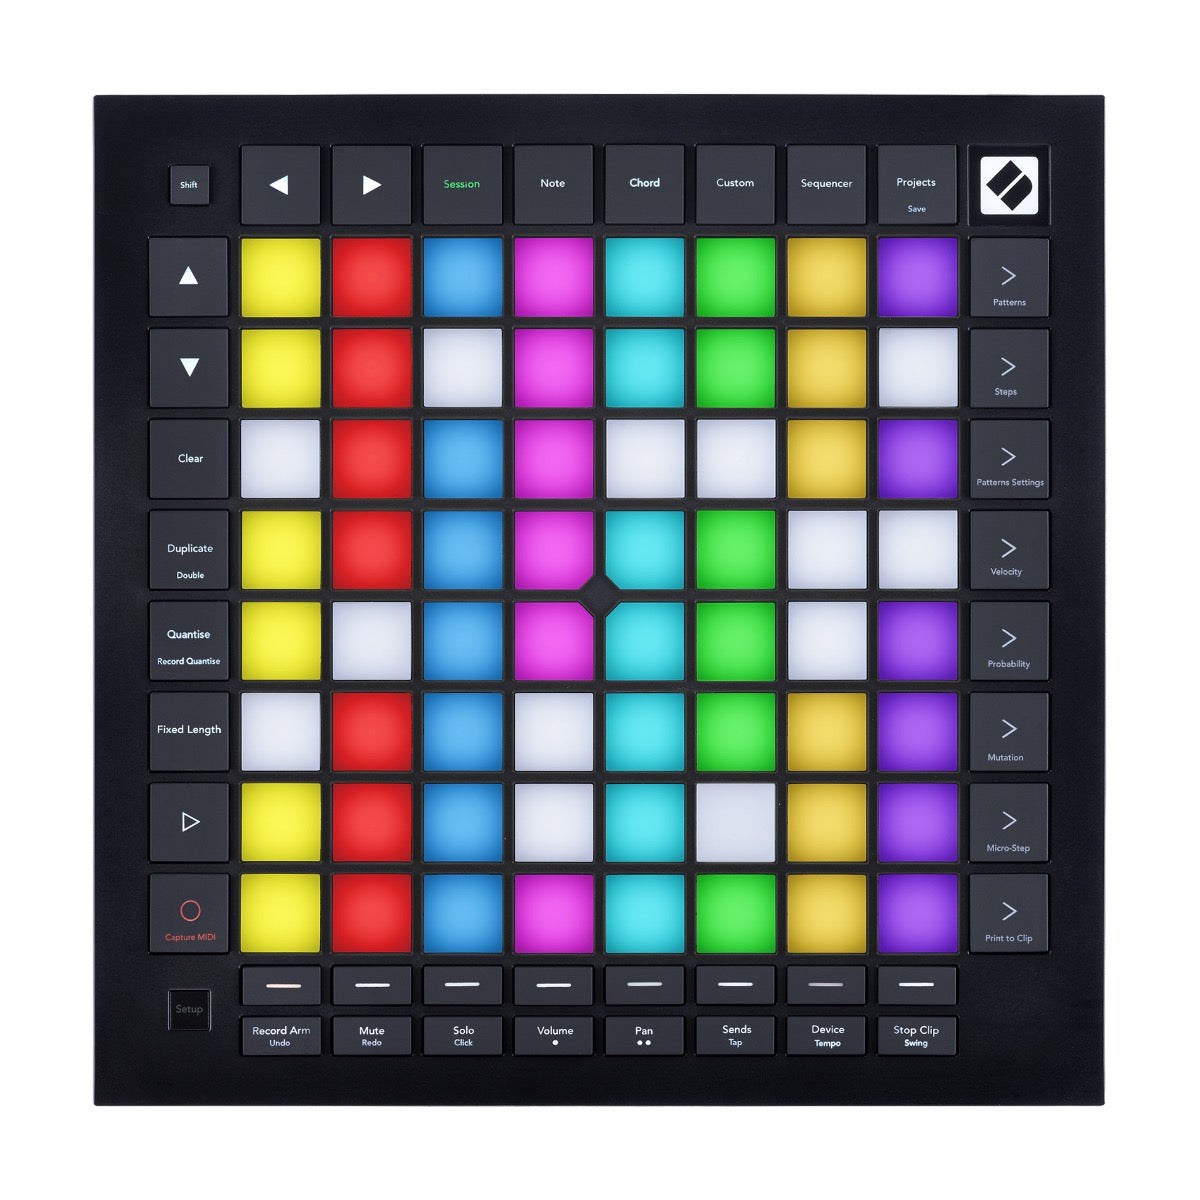 Top view of Novation Launchpad Pro with pads lit up in yellow, red, blue, purple, light blue, green and white